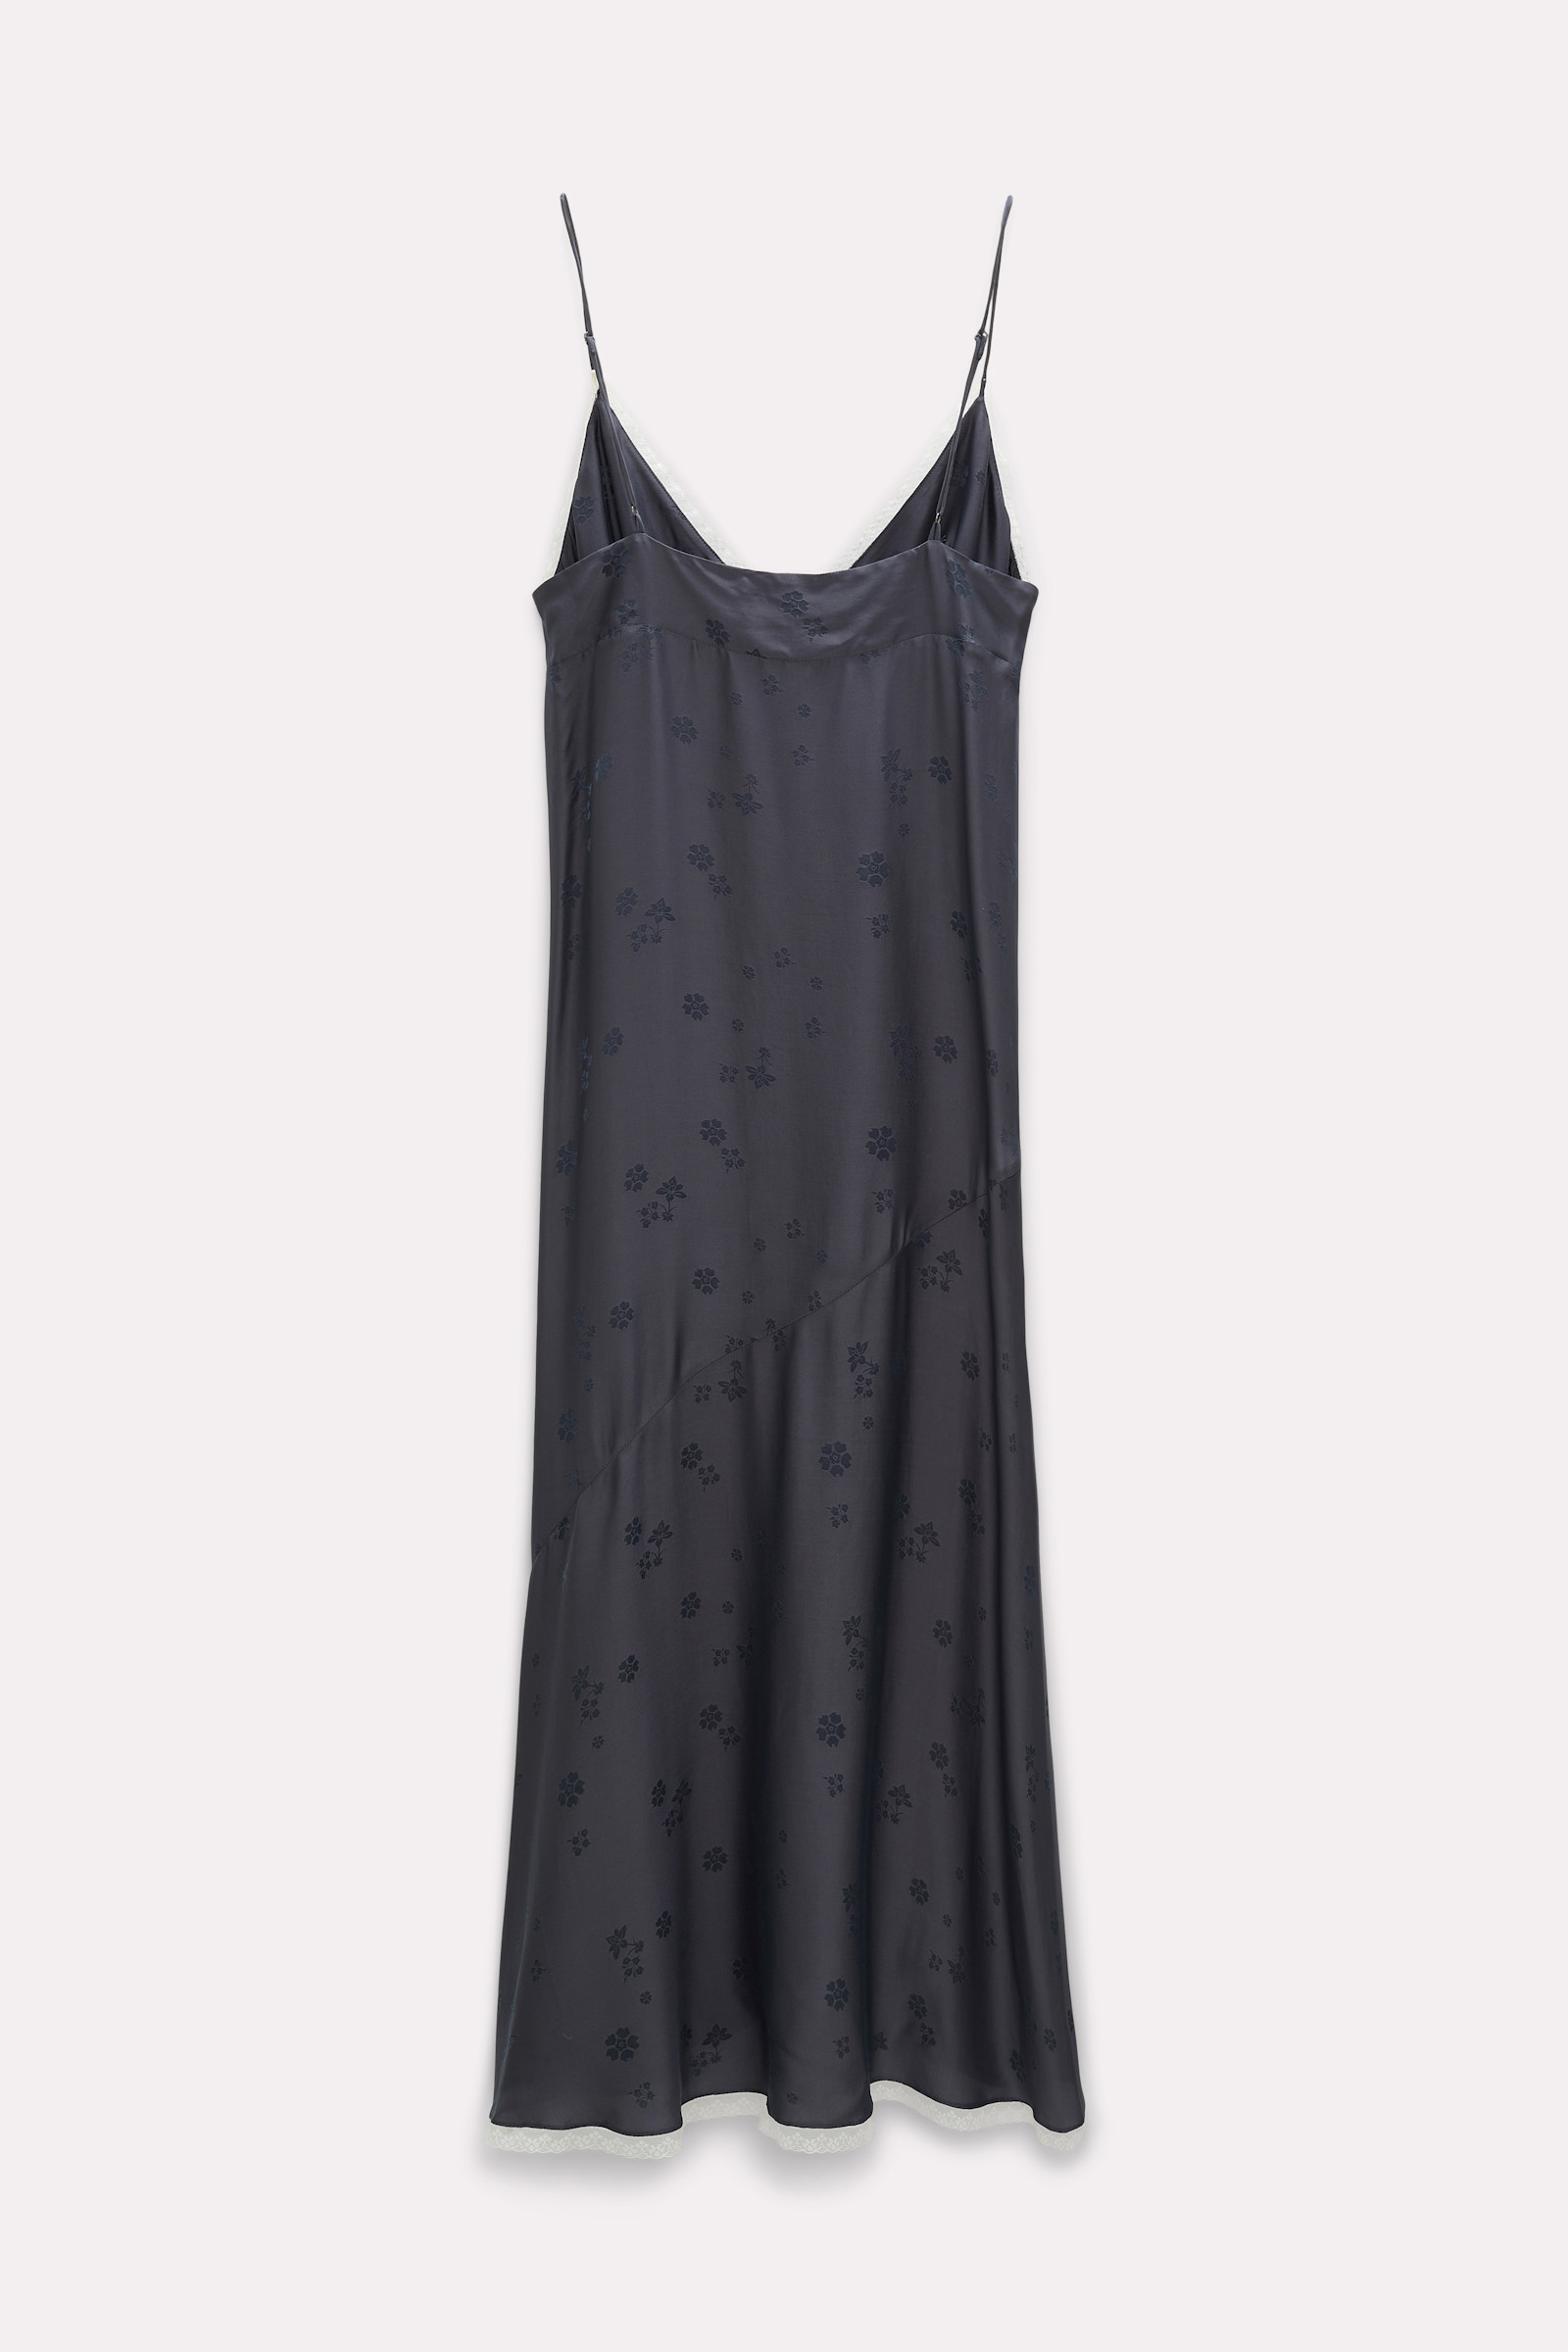 SENSUAL STRUCTURES dress